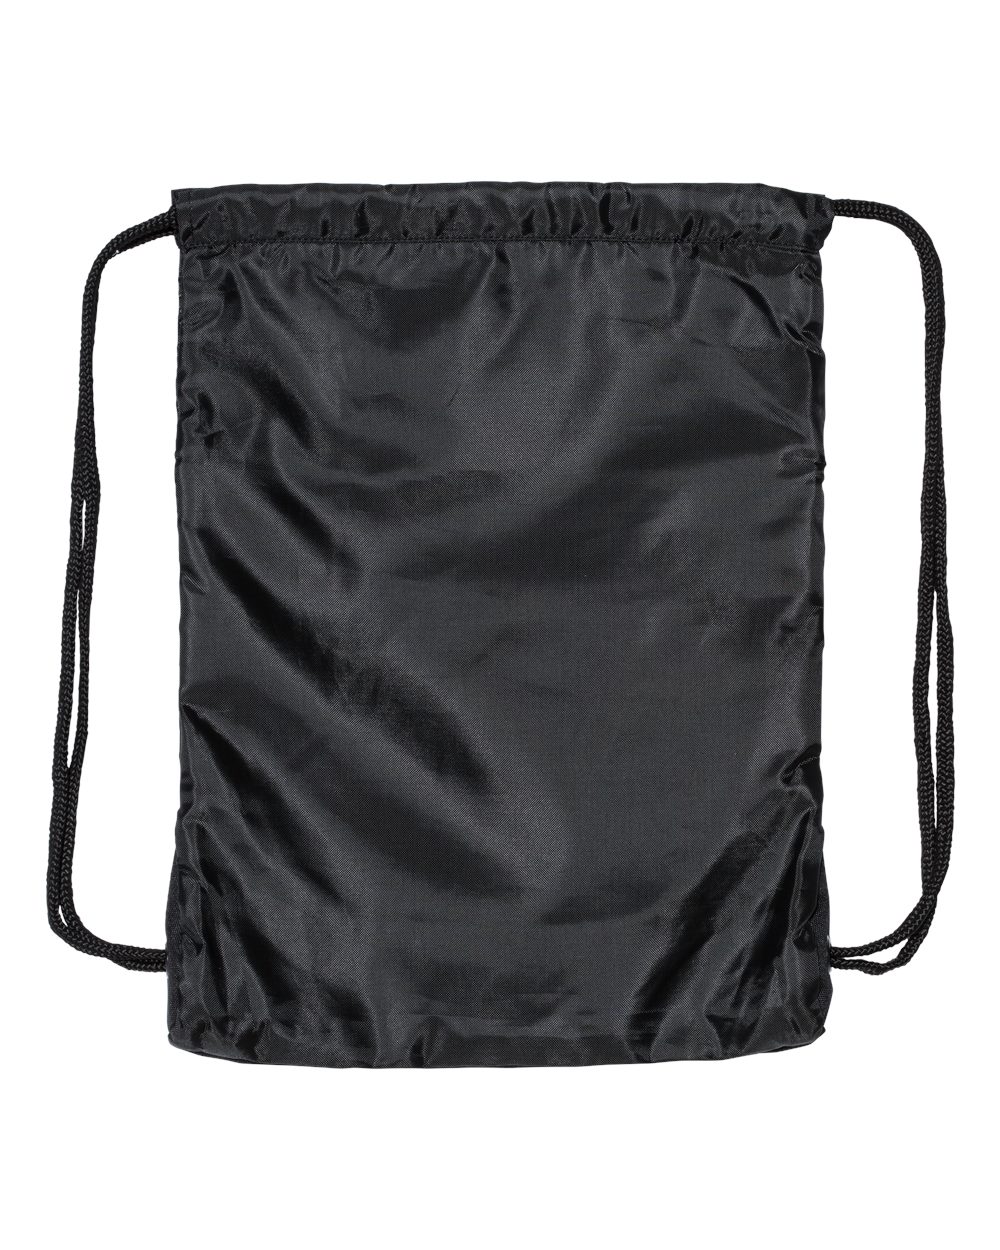 Carry Sack - PSC1036-